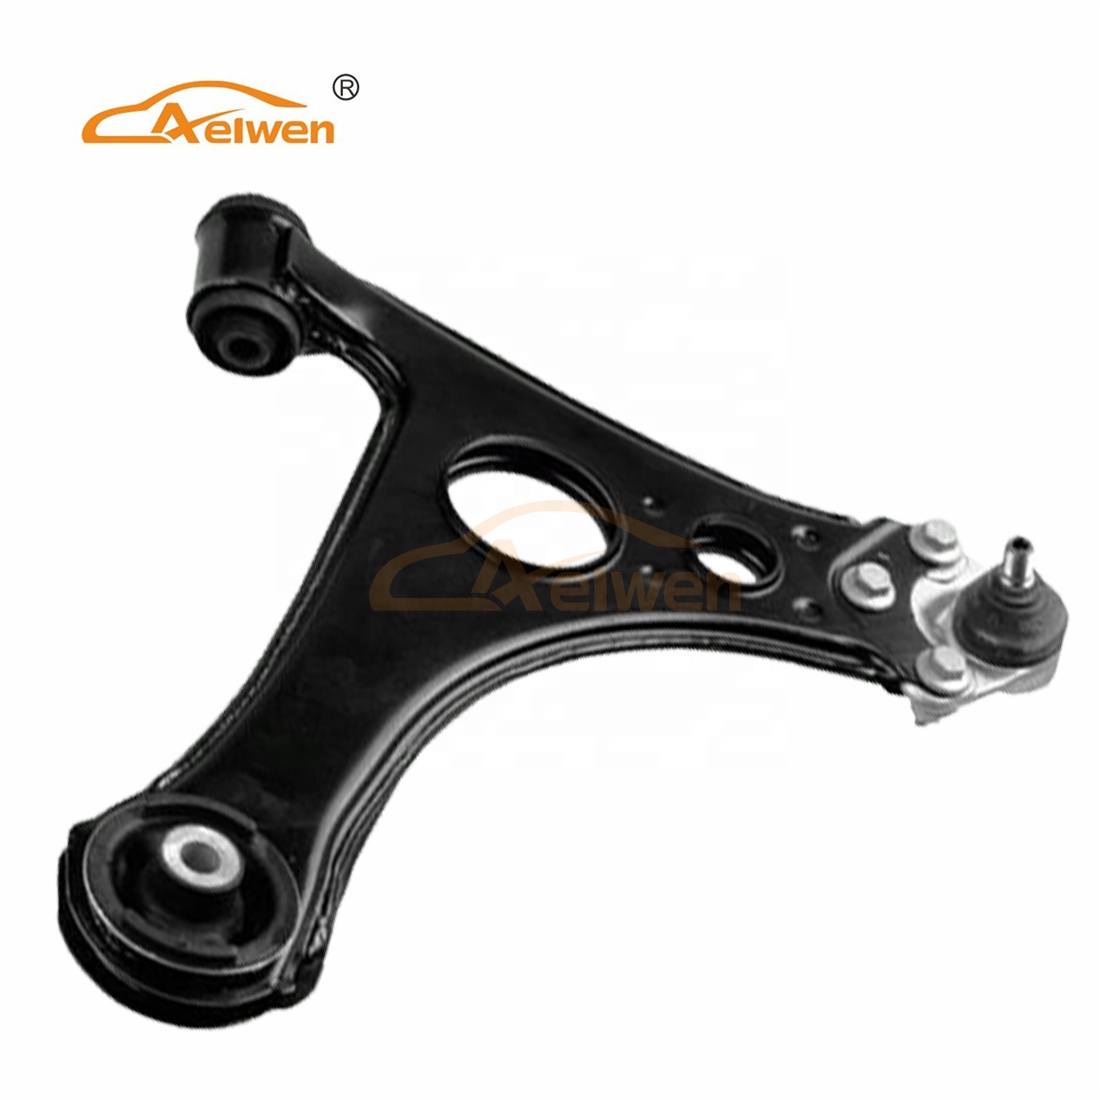 Auto Control Arm fits for W168 Left: 1683300807  1683301107  1683301707  Right: 1683300907  1683301207  1683301807